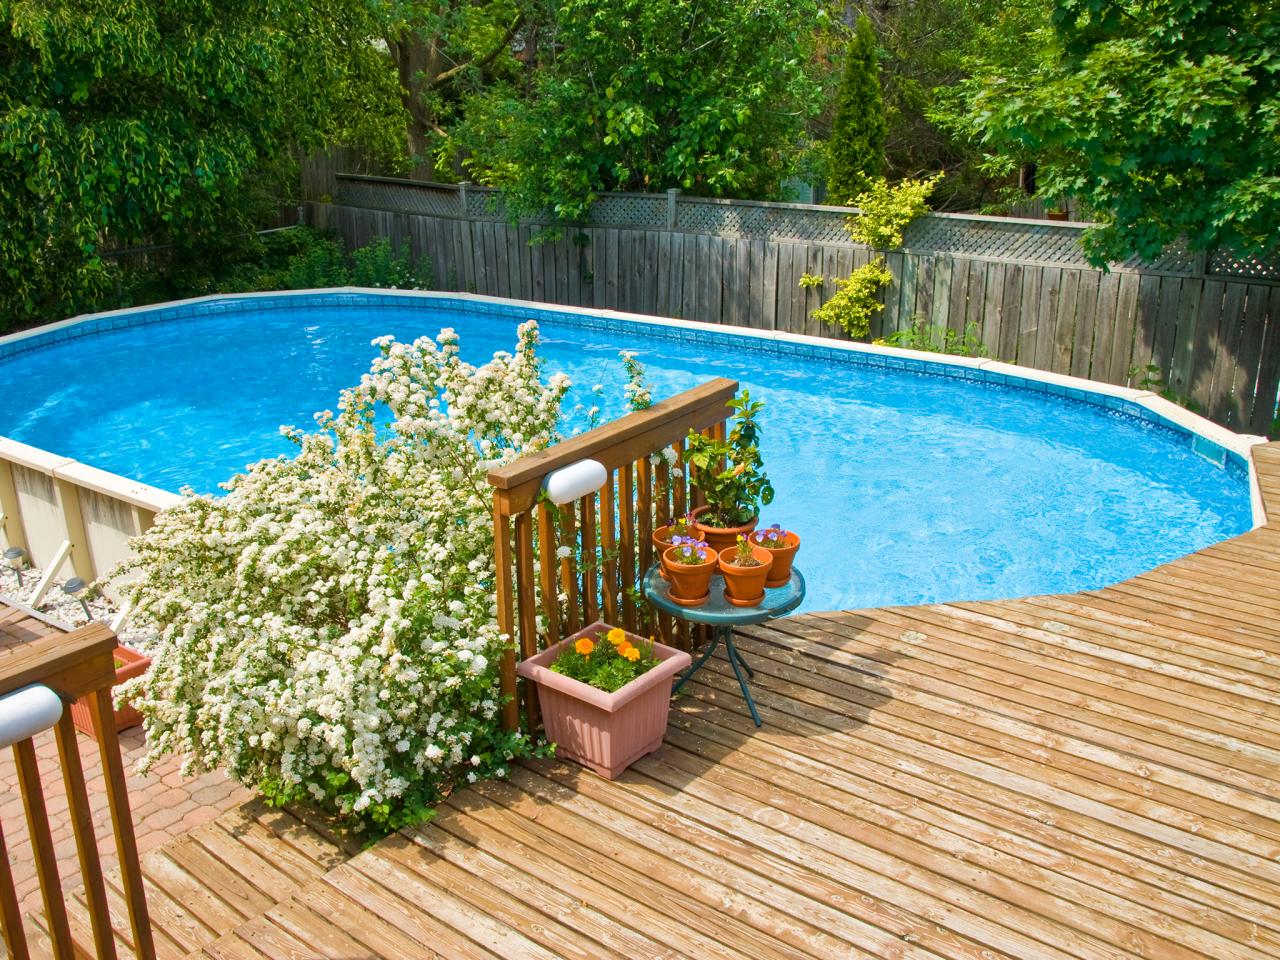 The most effective method to Cover An Above Ground Pool With A Deck